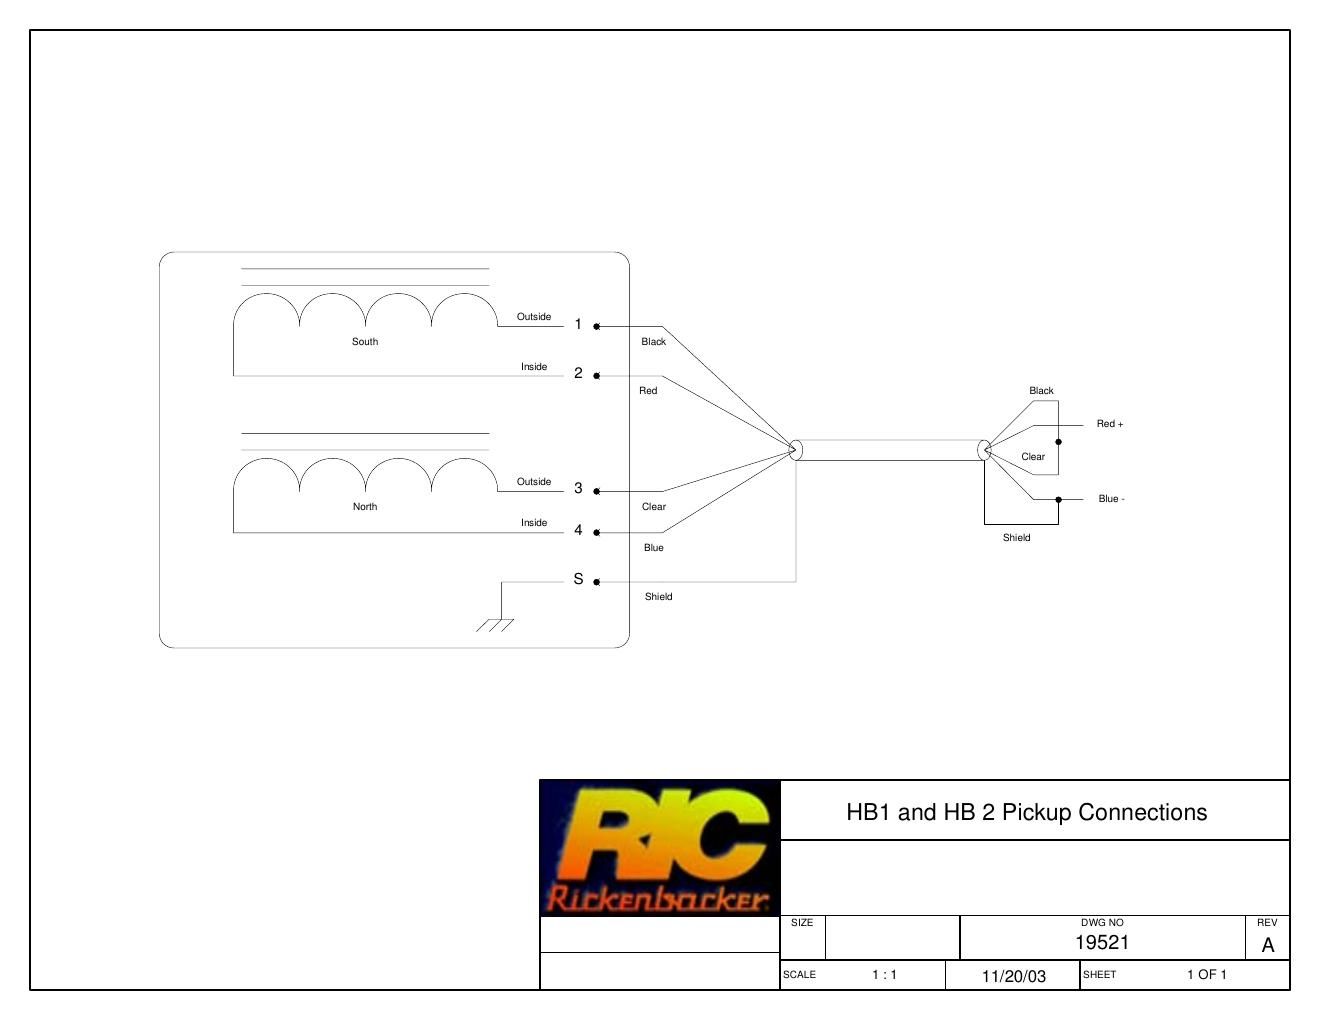 rickenbacker hb 1 hb 2 pickup connections diagram